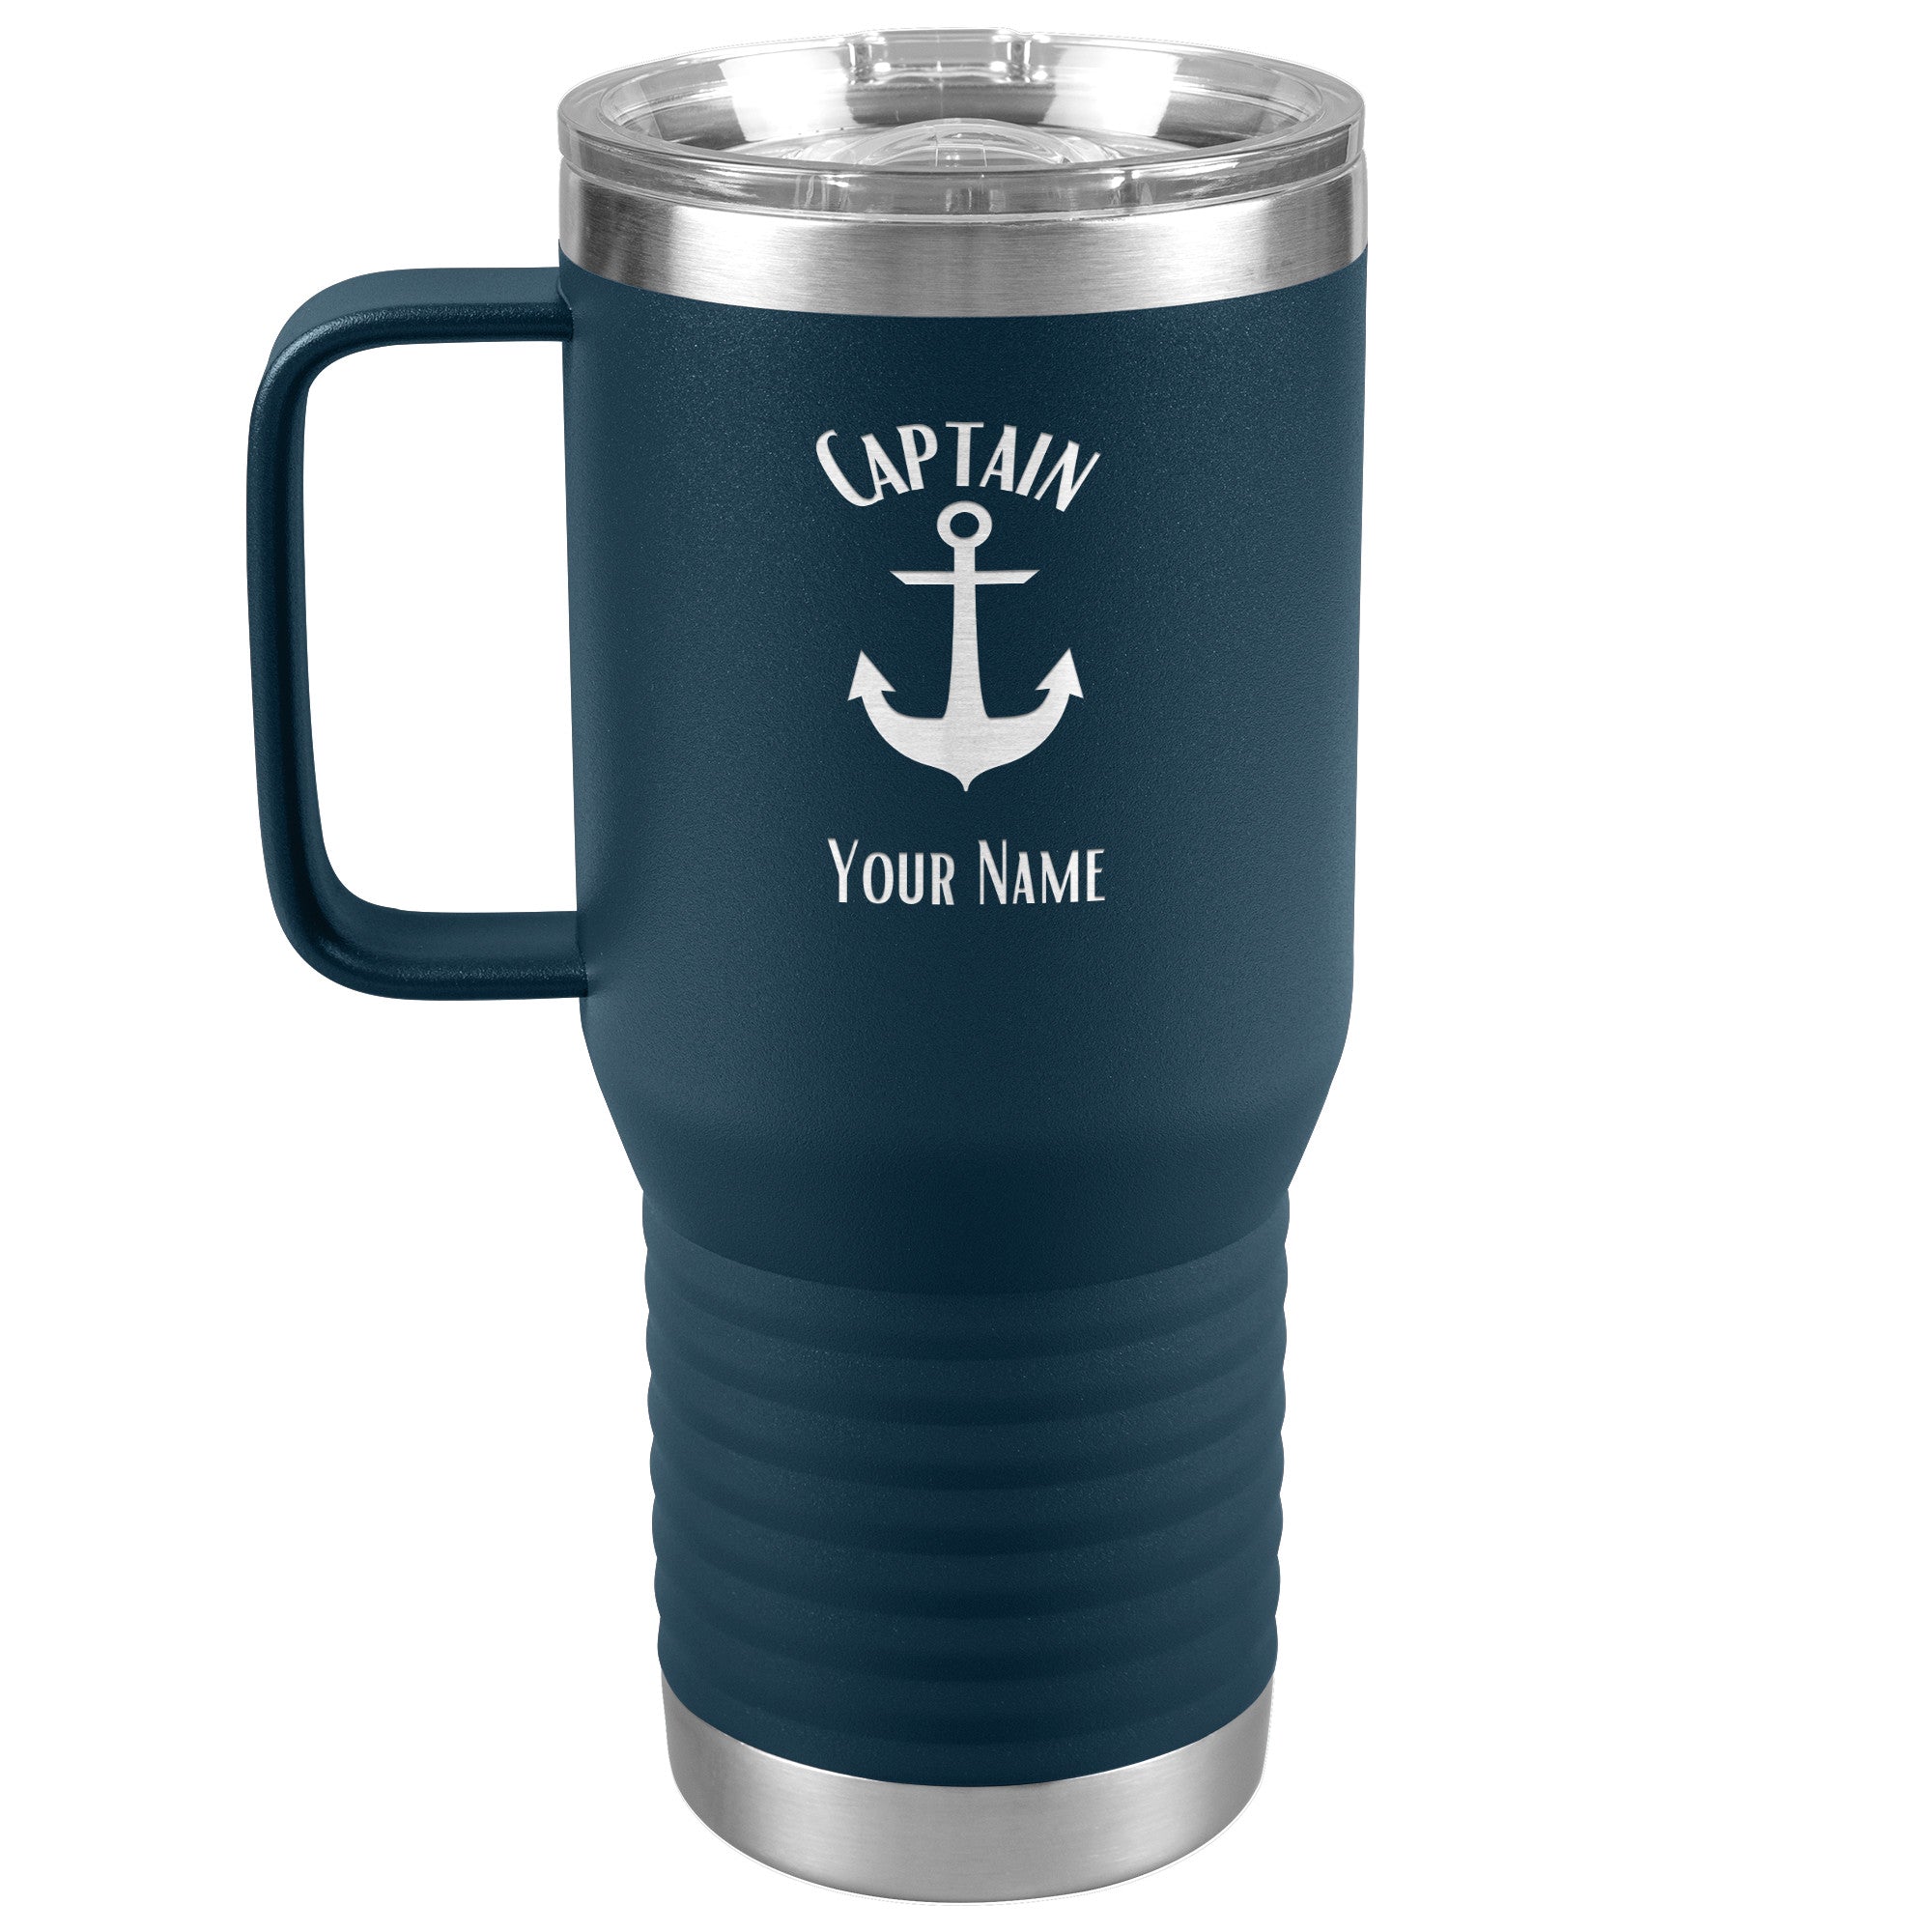 Boat Gifts, Nautical Gifts, Boat Tumbler, Personalized, Boating Gifts, –  Reel Mermaid